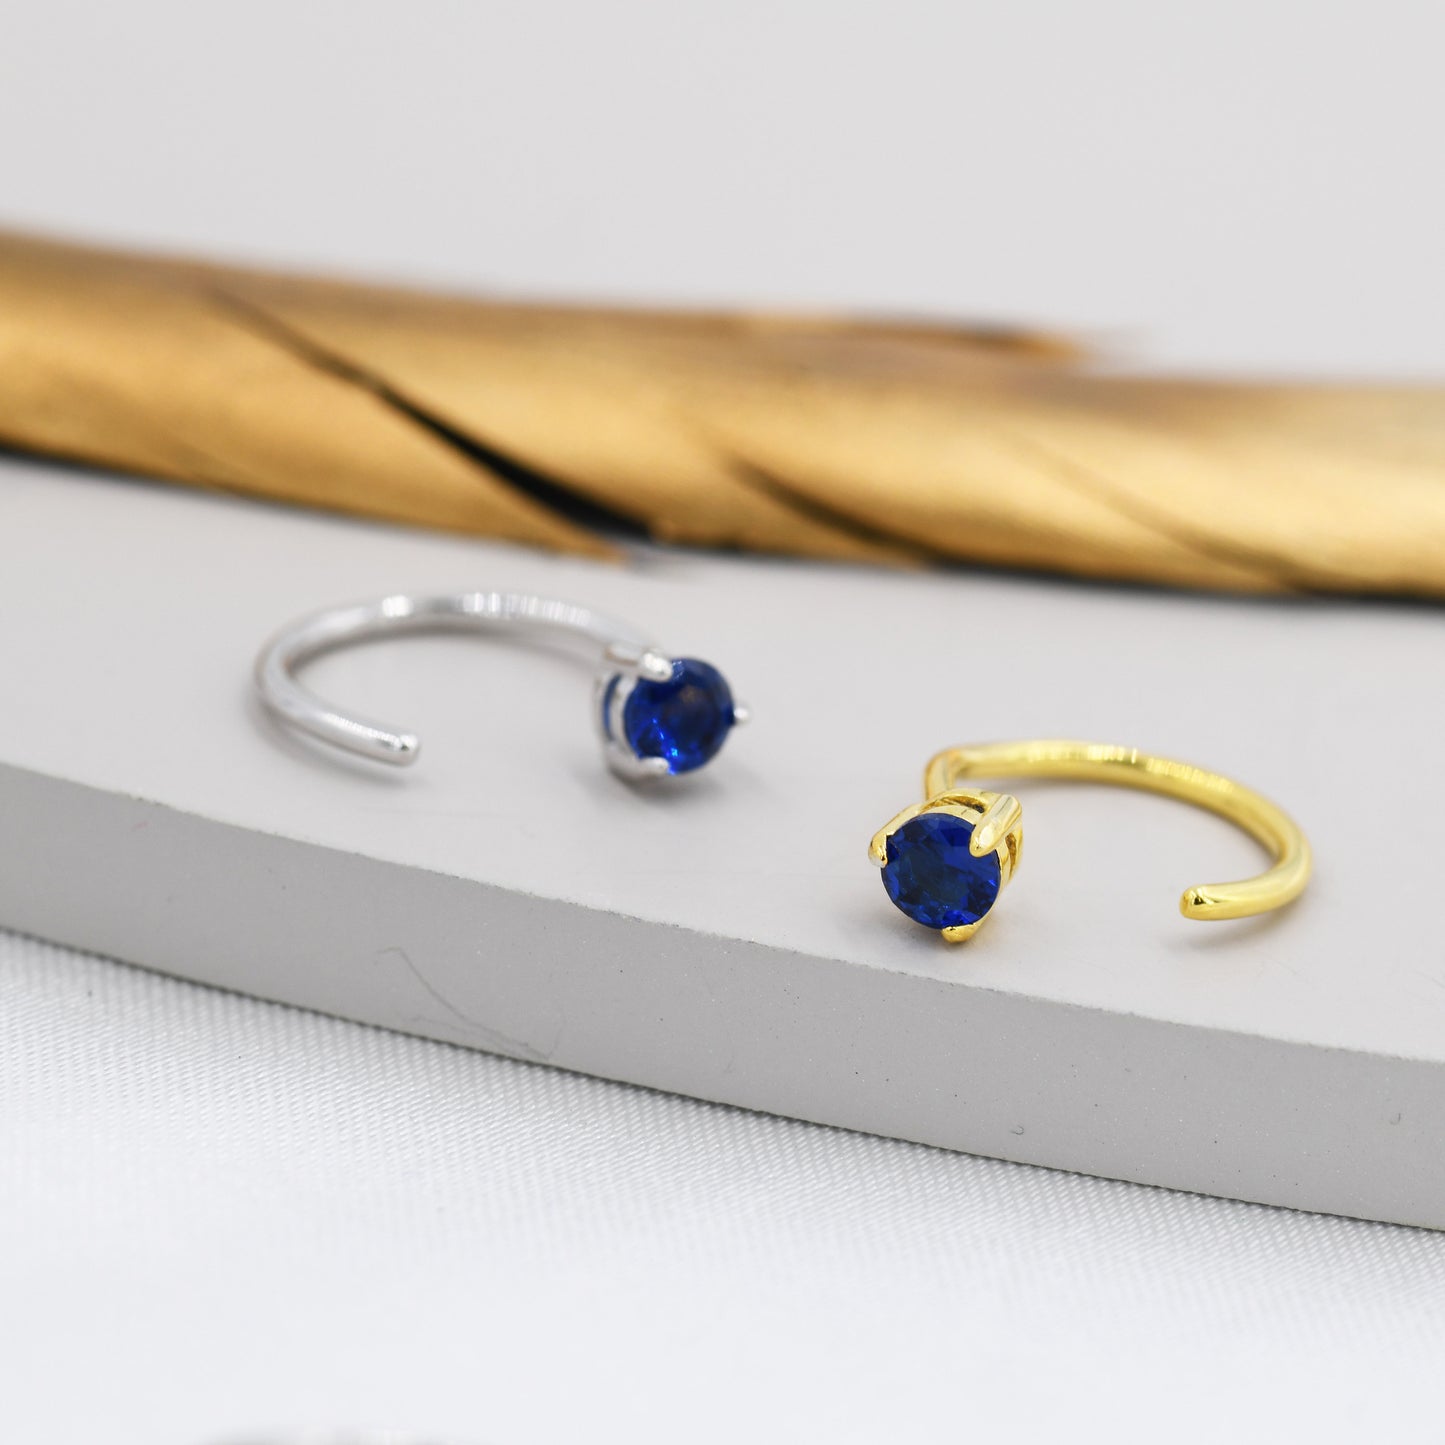 Sapphire Blue CZ Crystal Huggie Hoop Threader Earrings in Sterling Silver, 3mm Three Prong, Gold or Silver, Pull Through Open Hoops